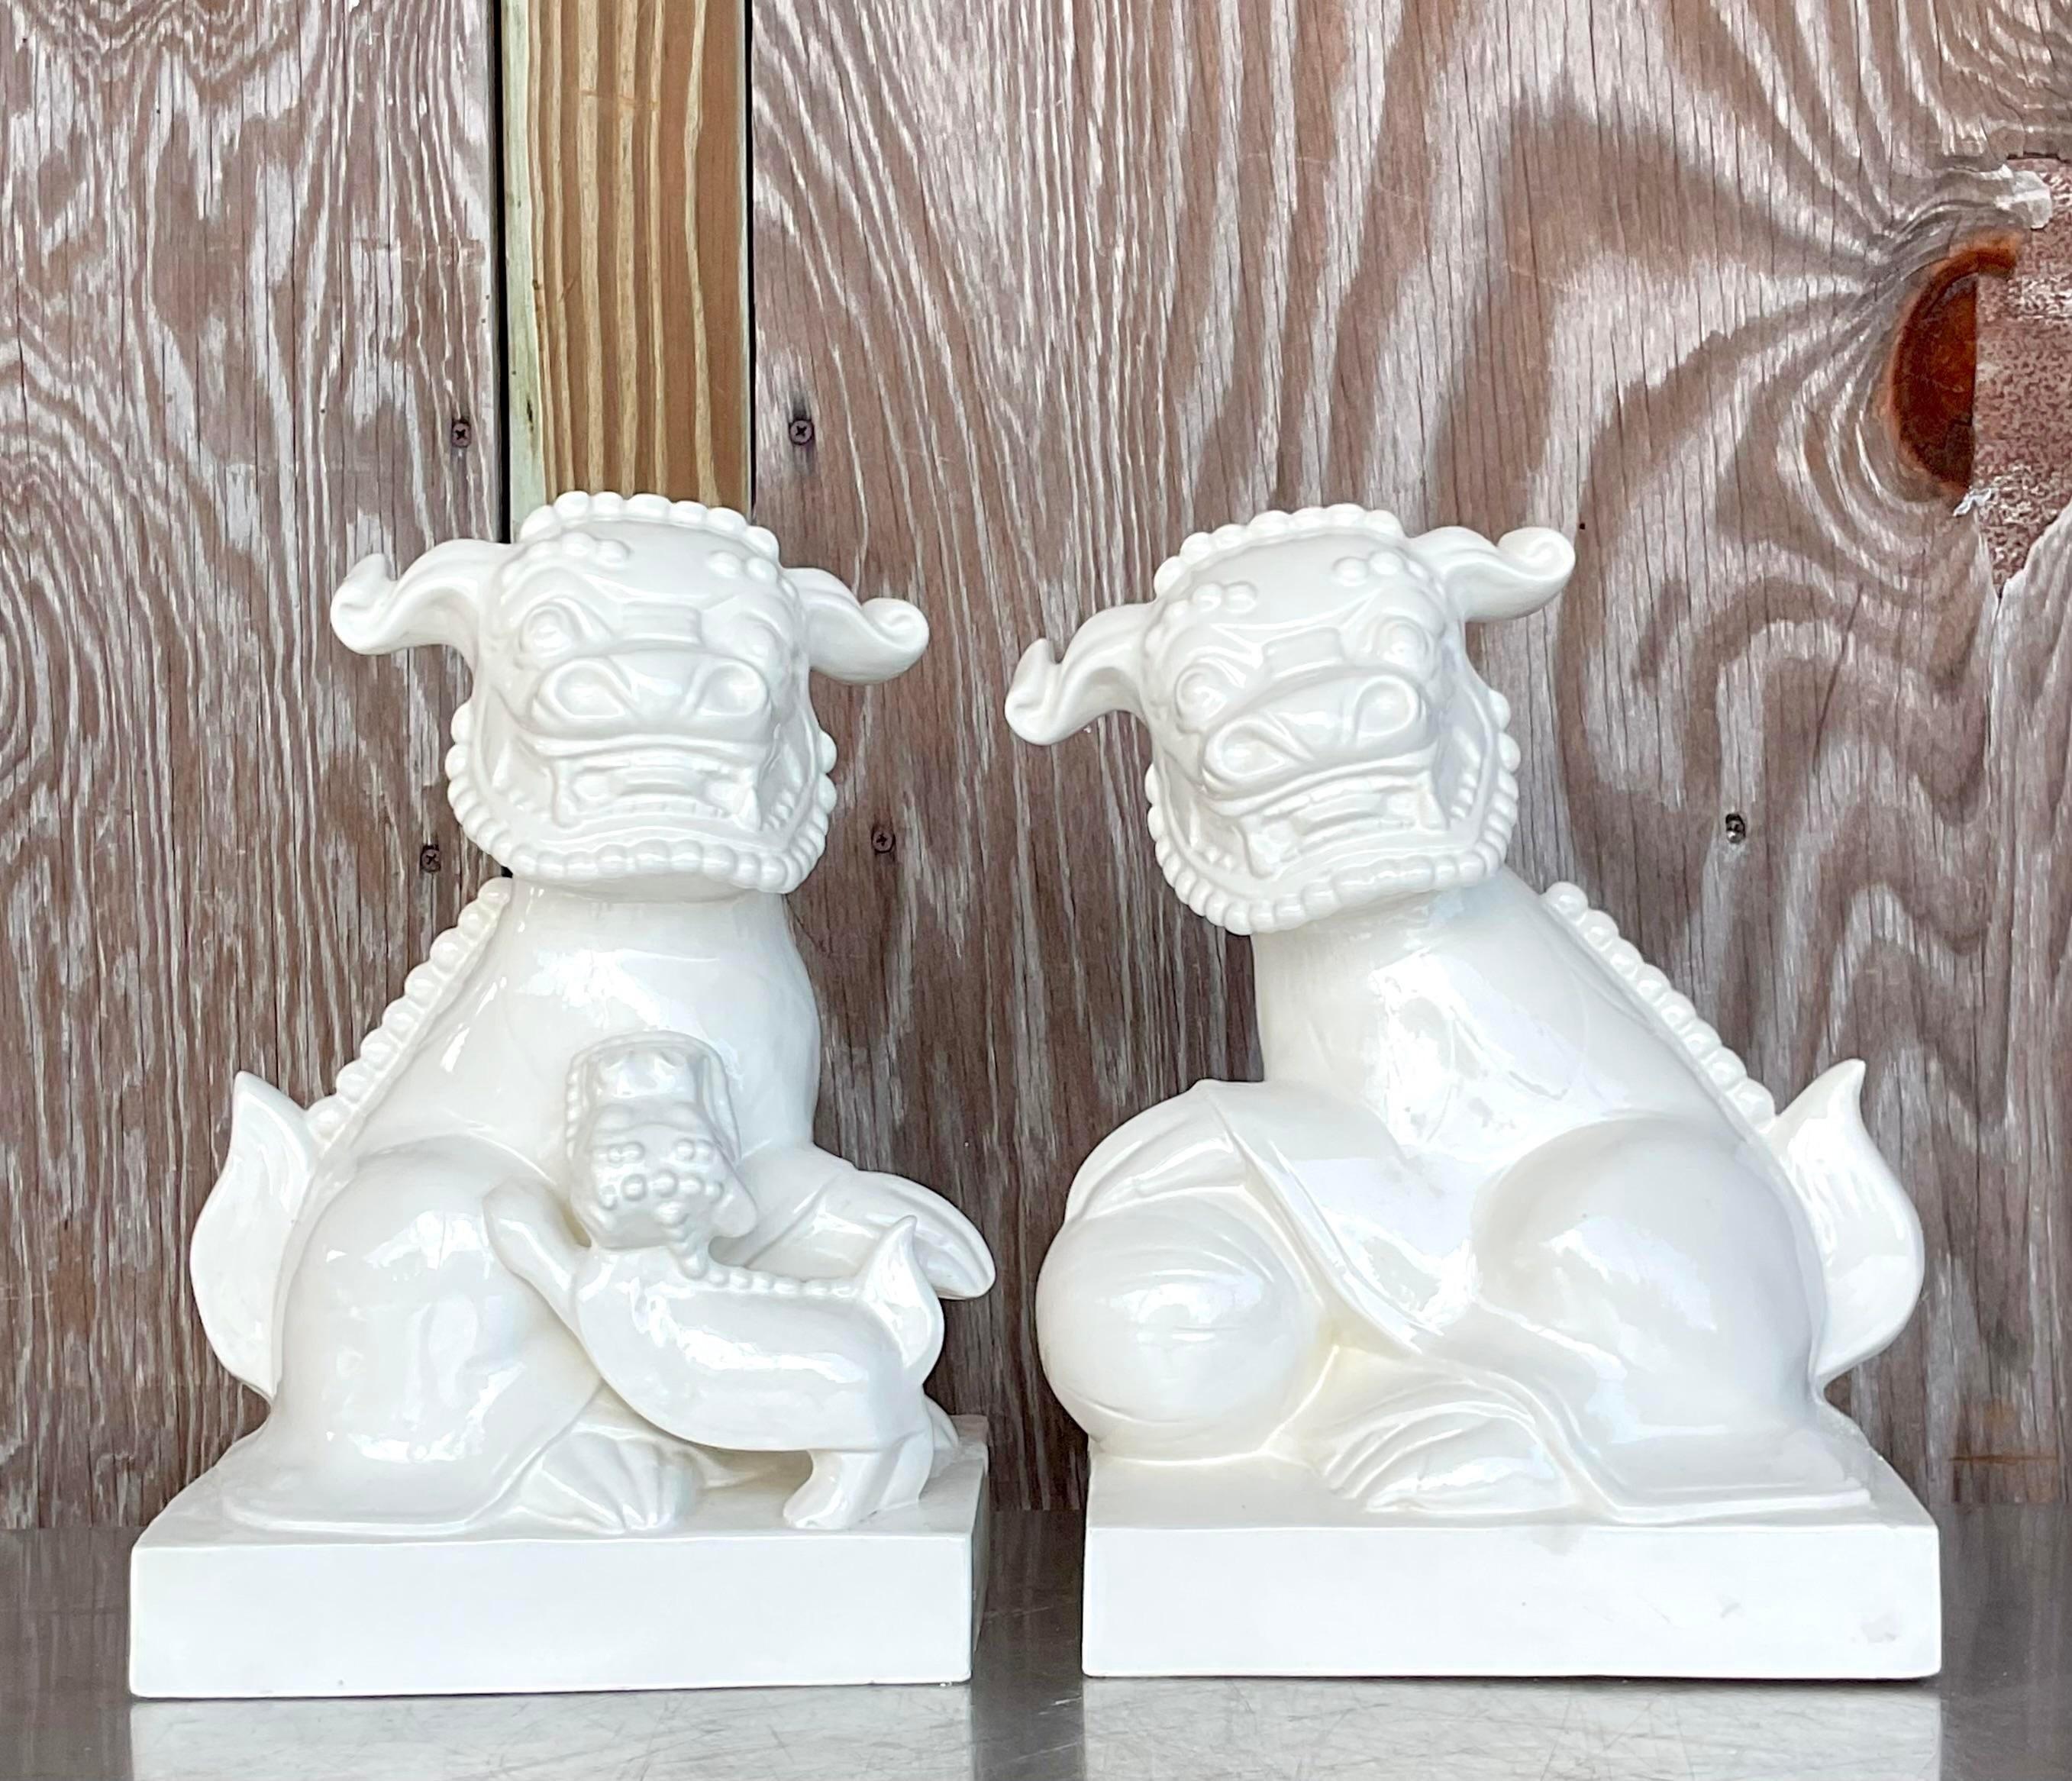 A fabulous pair of vintage Asian foo dogs. Chic white glazed ceramic finish and a playful pose. Acquired from a Palm Beach estate.